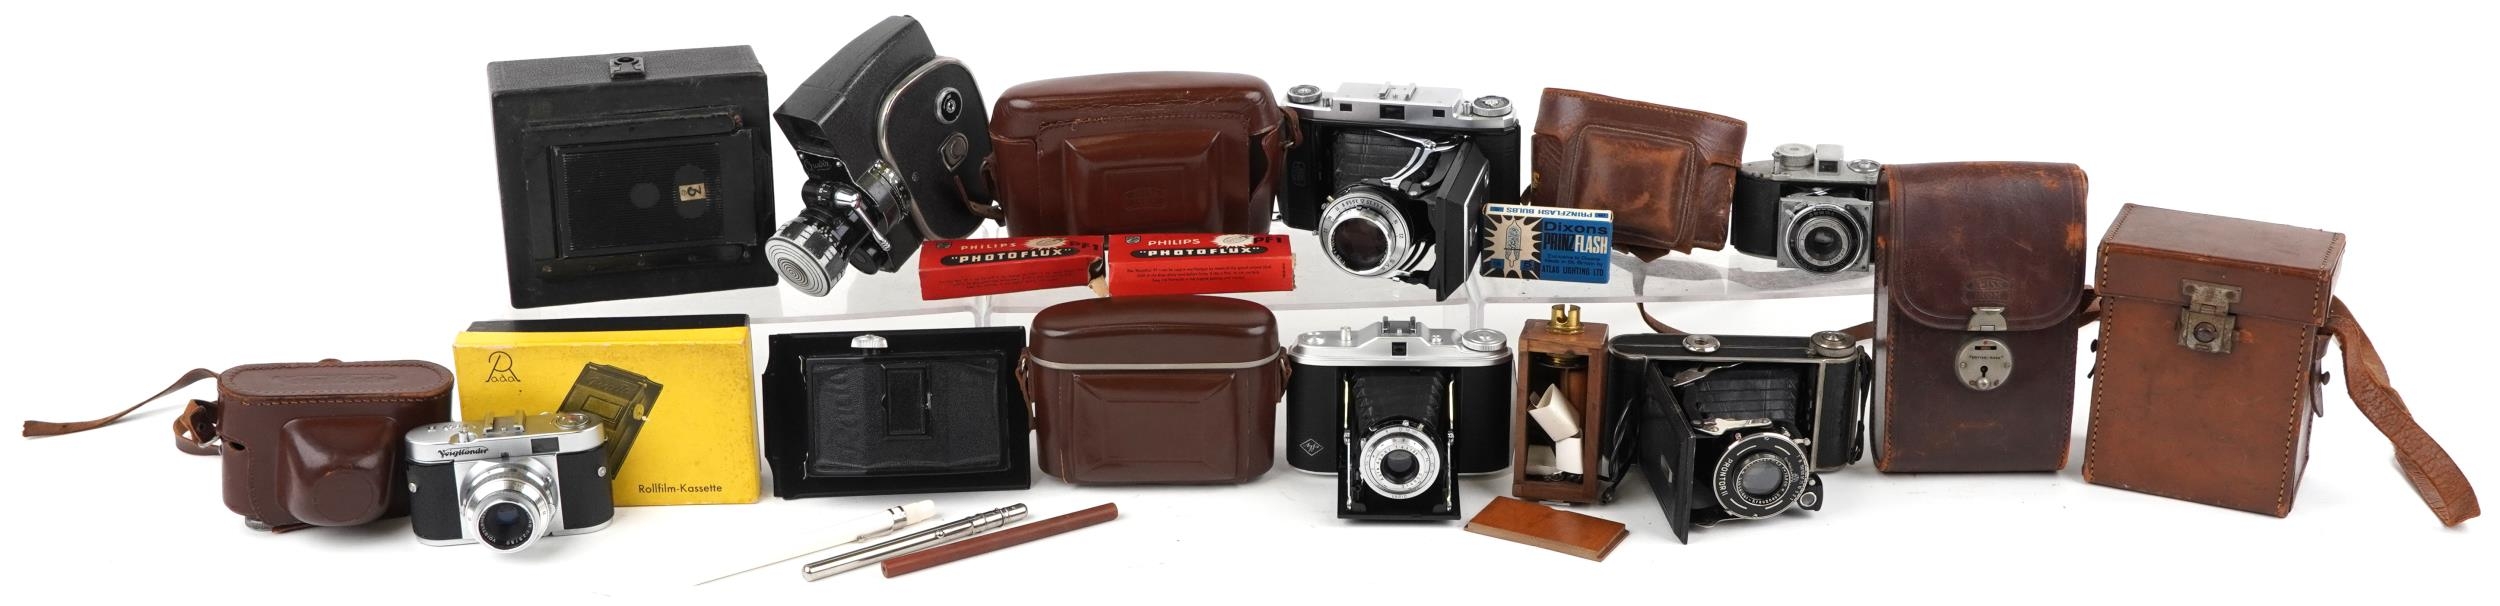 Vintage cameras and accessories including Zeiss Ikon, AGFA Isolette and Voigtlander